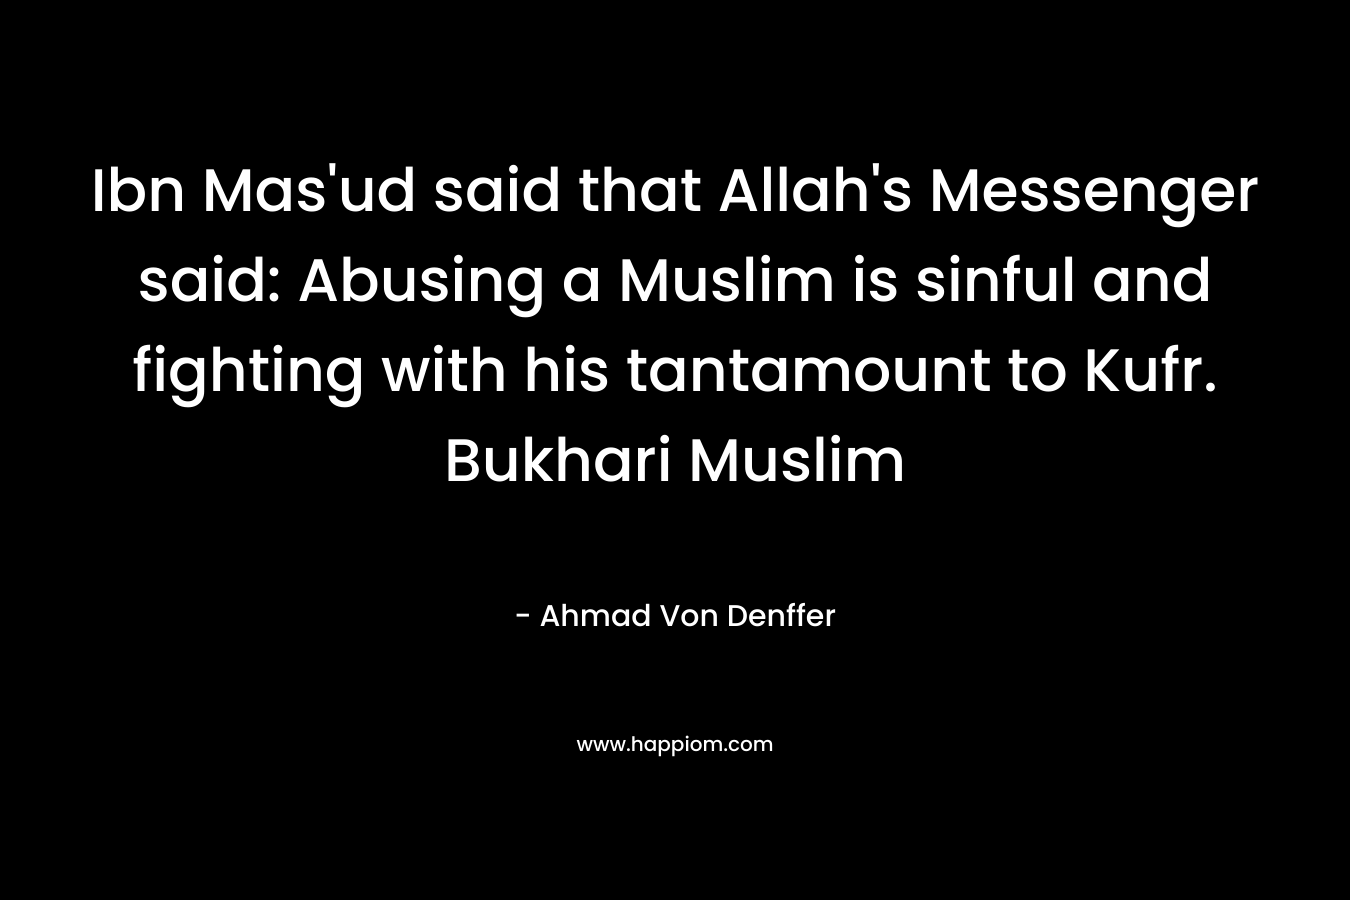 Ibn Mas'ud said that Allah's Messenger said: Abusing a Muslim is sinful and fighting with his tantamount to Kufr. Bukhari Muslim